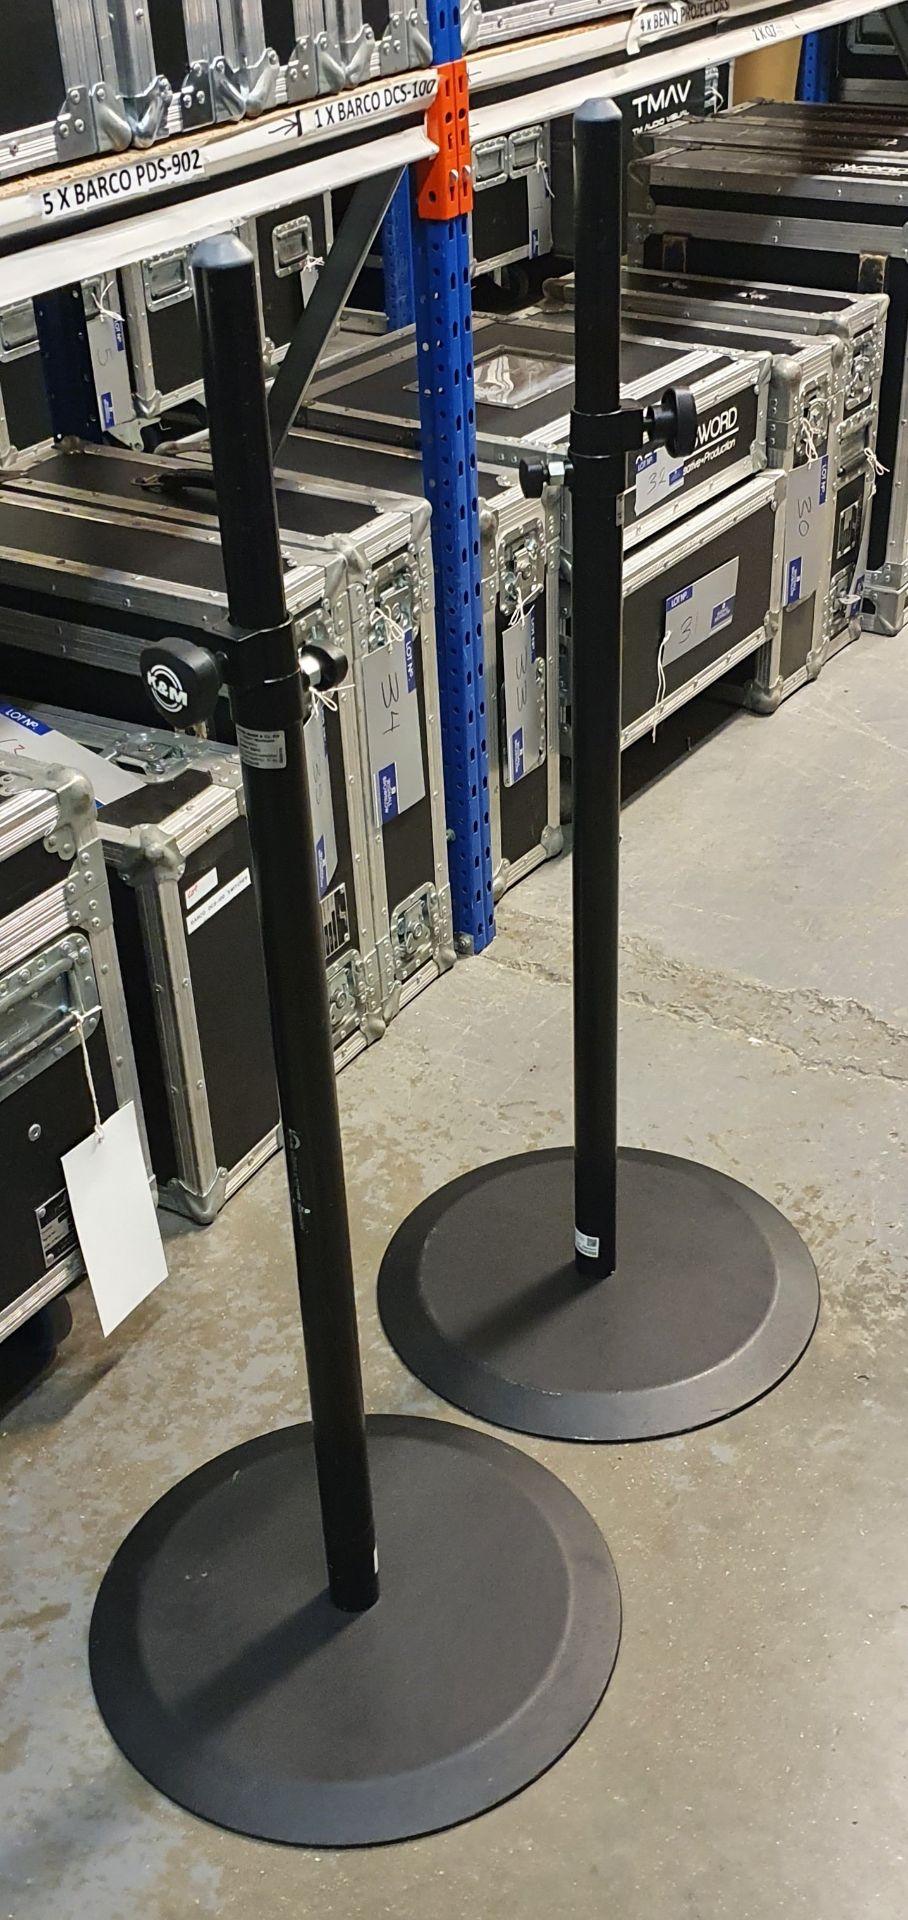 A Pair of K+M Black Speaker Round Base Stands comprising: 2 poles and 2 bases with carry bags.